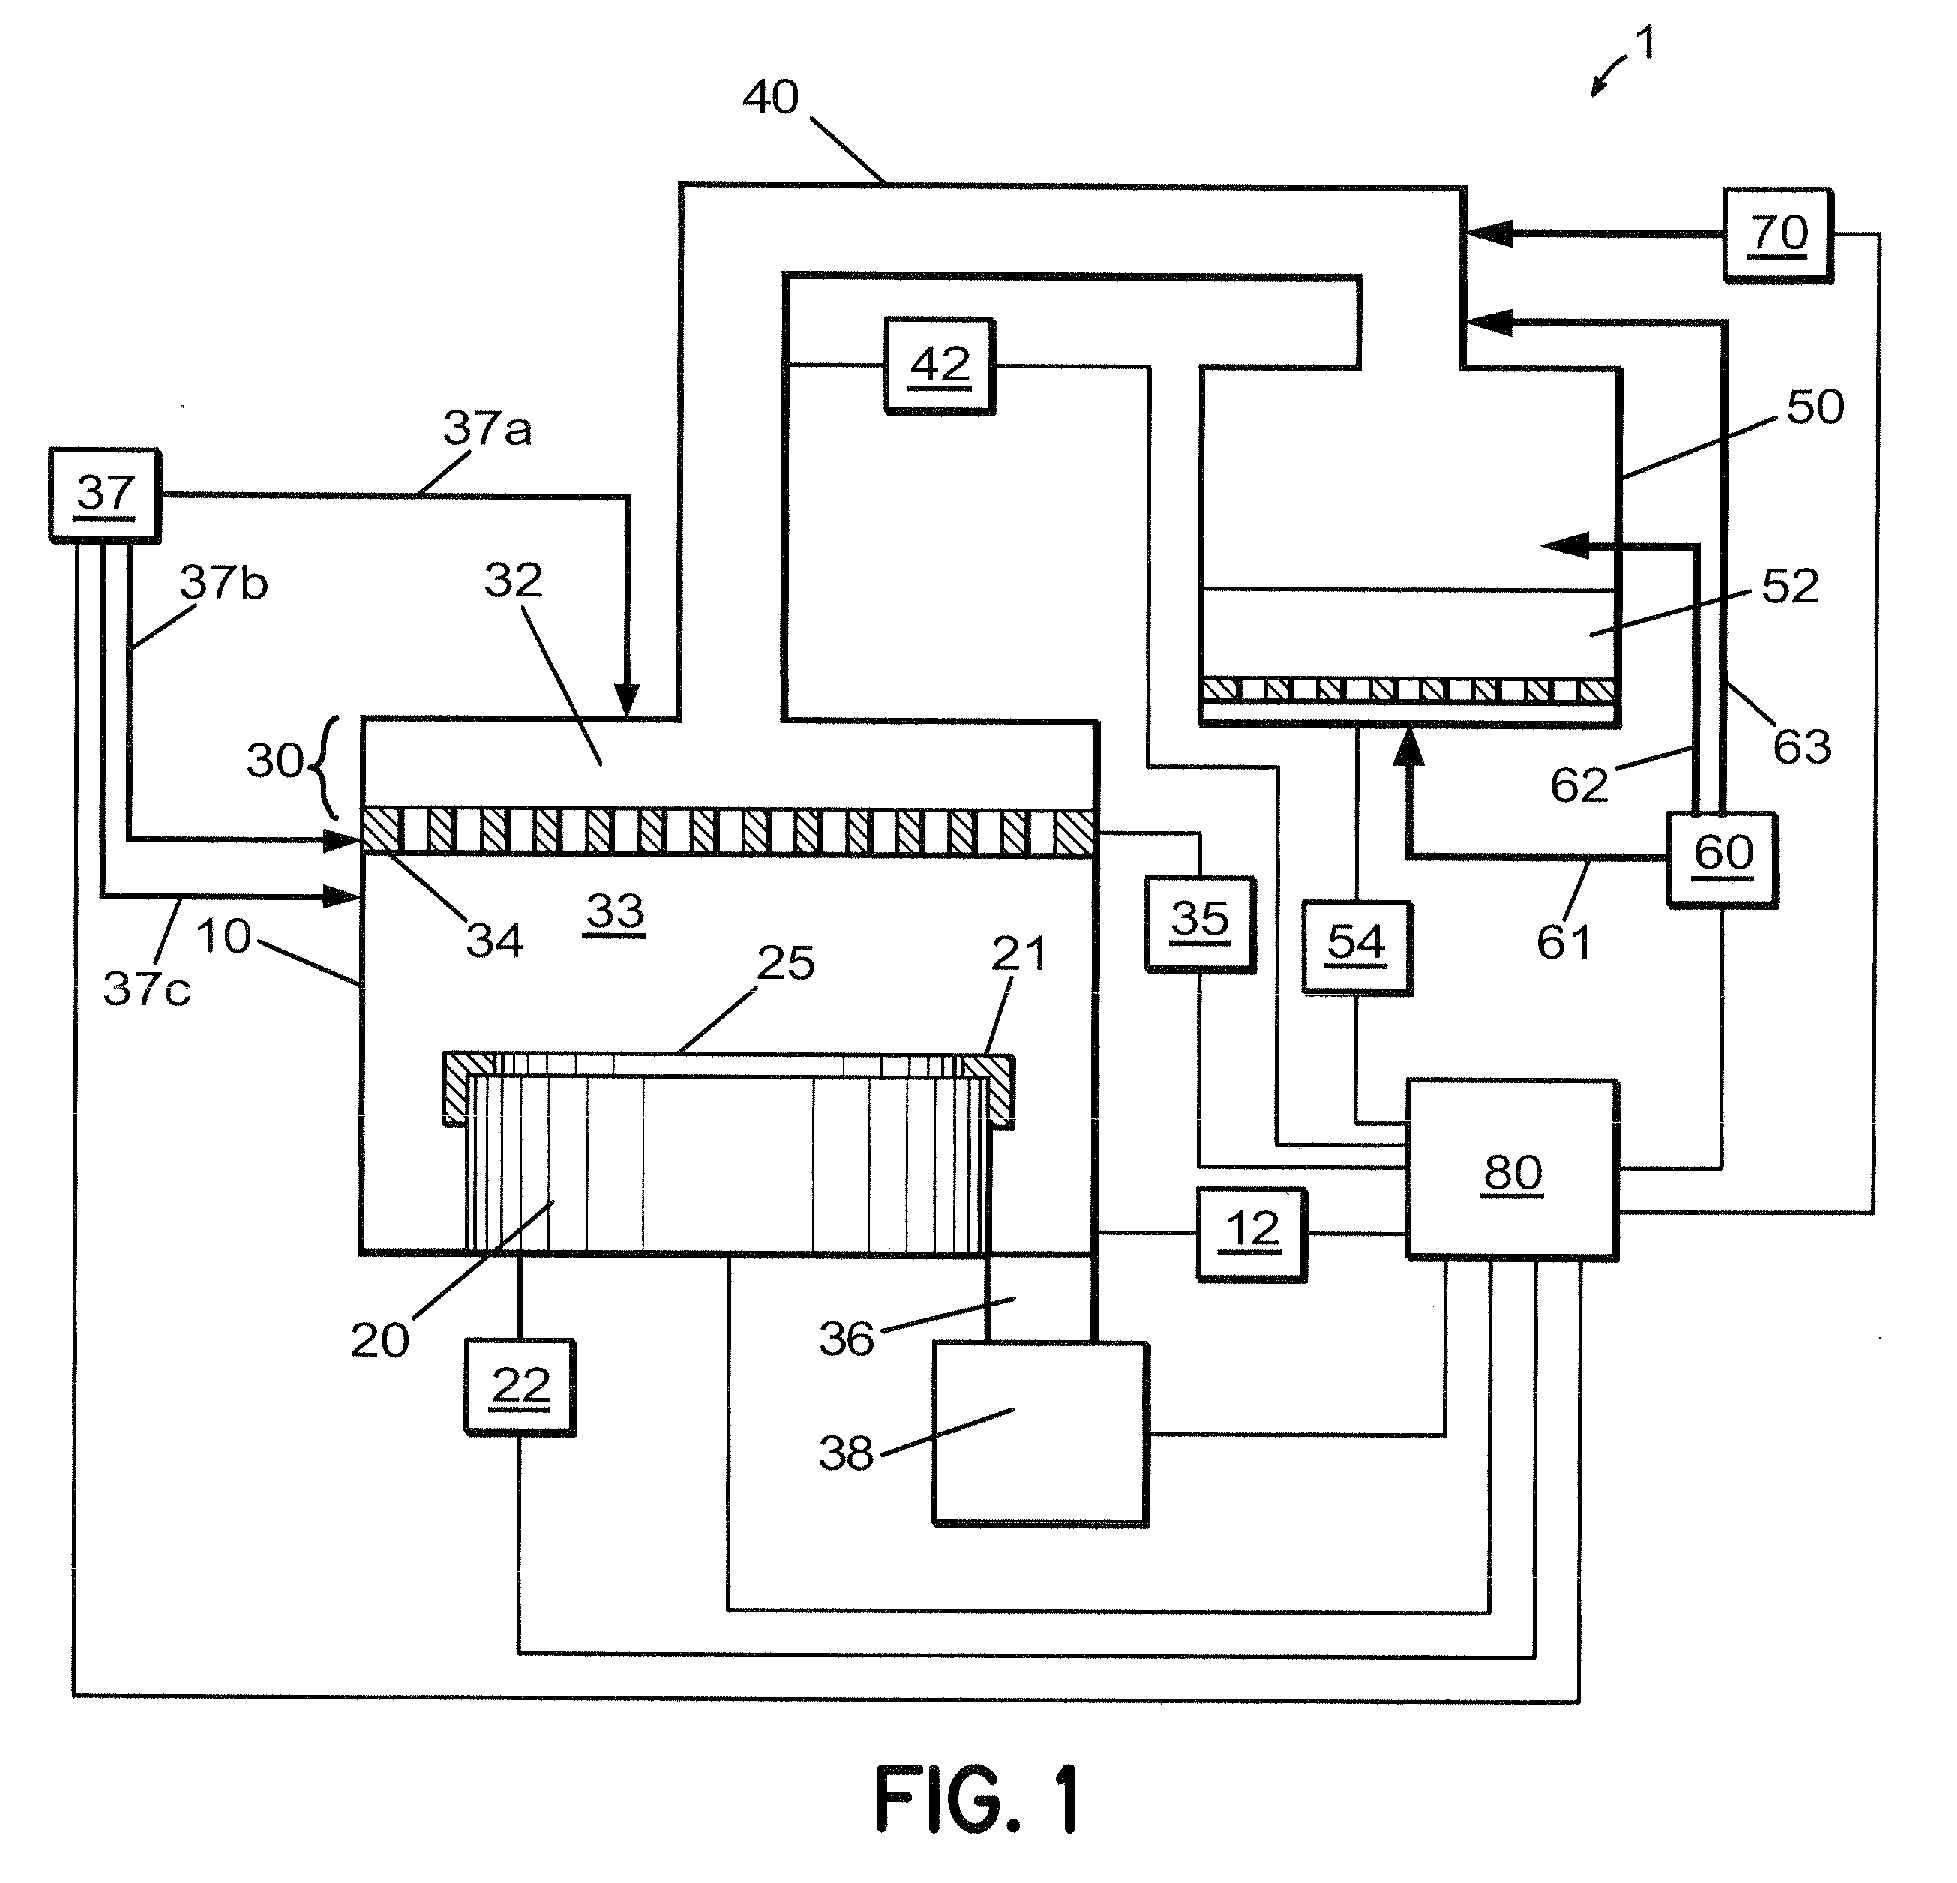 Method and apparatus for reducing carbon monoxide poisoning at the peripheral edge of a substrate in a thin film deposition system